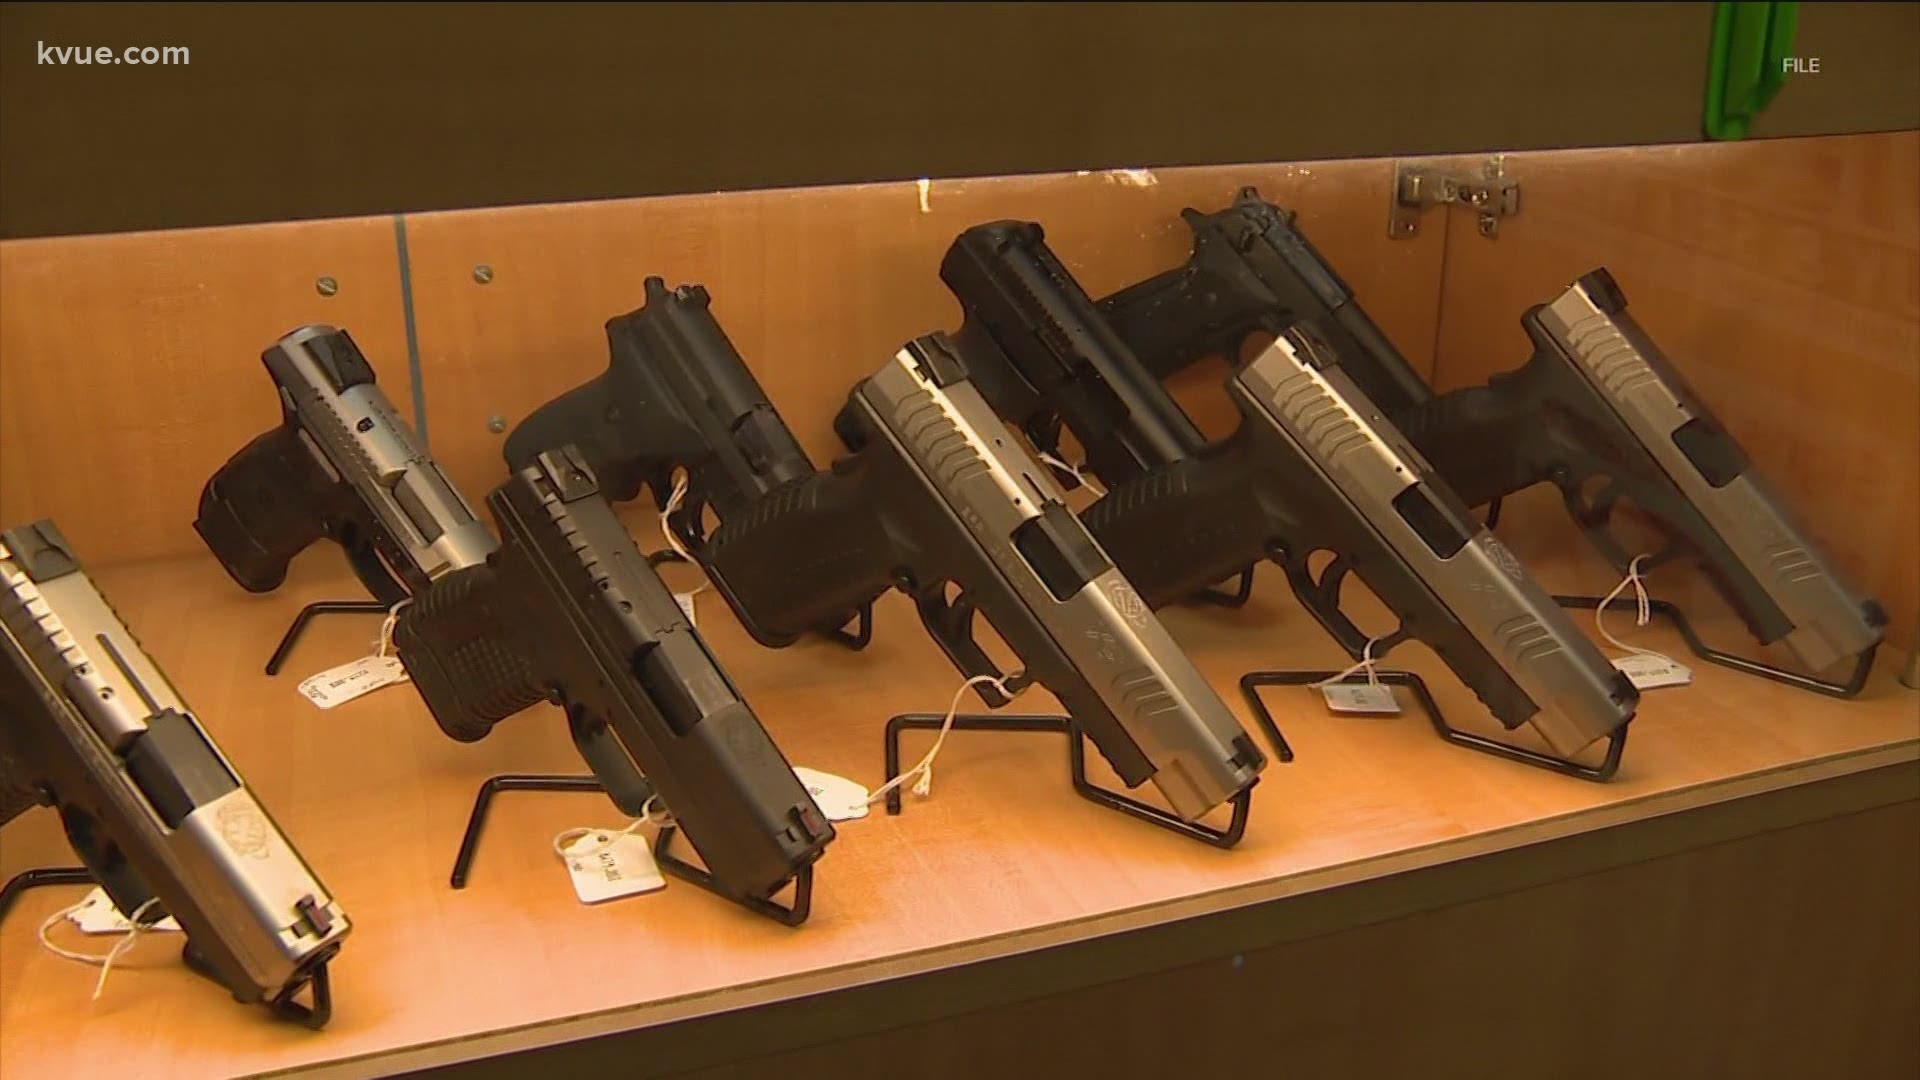 Gov. Greg Abbott is expanding gun rights in Texas, signing more than half a dozen bills into law. KVUE's Bryce Newberry has the breakdown.